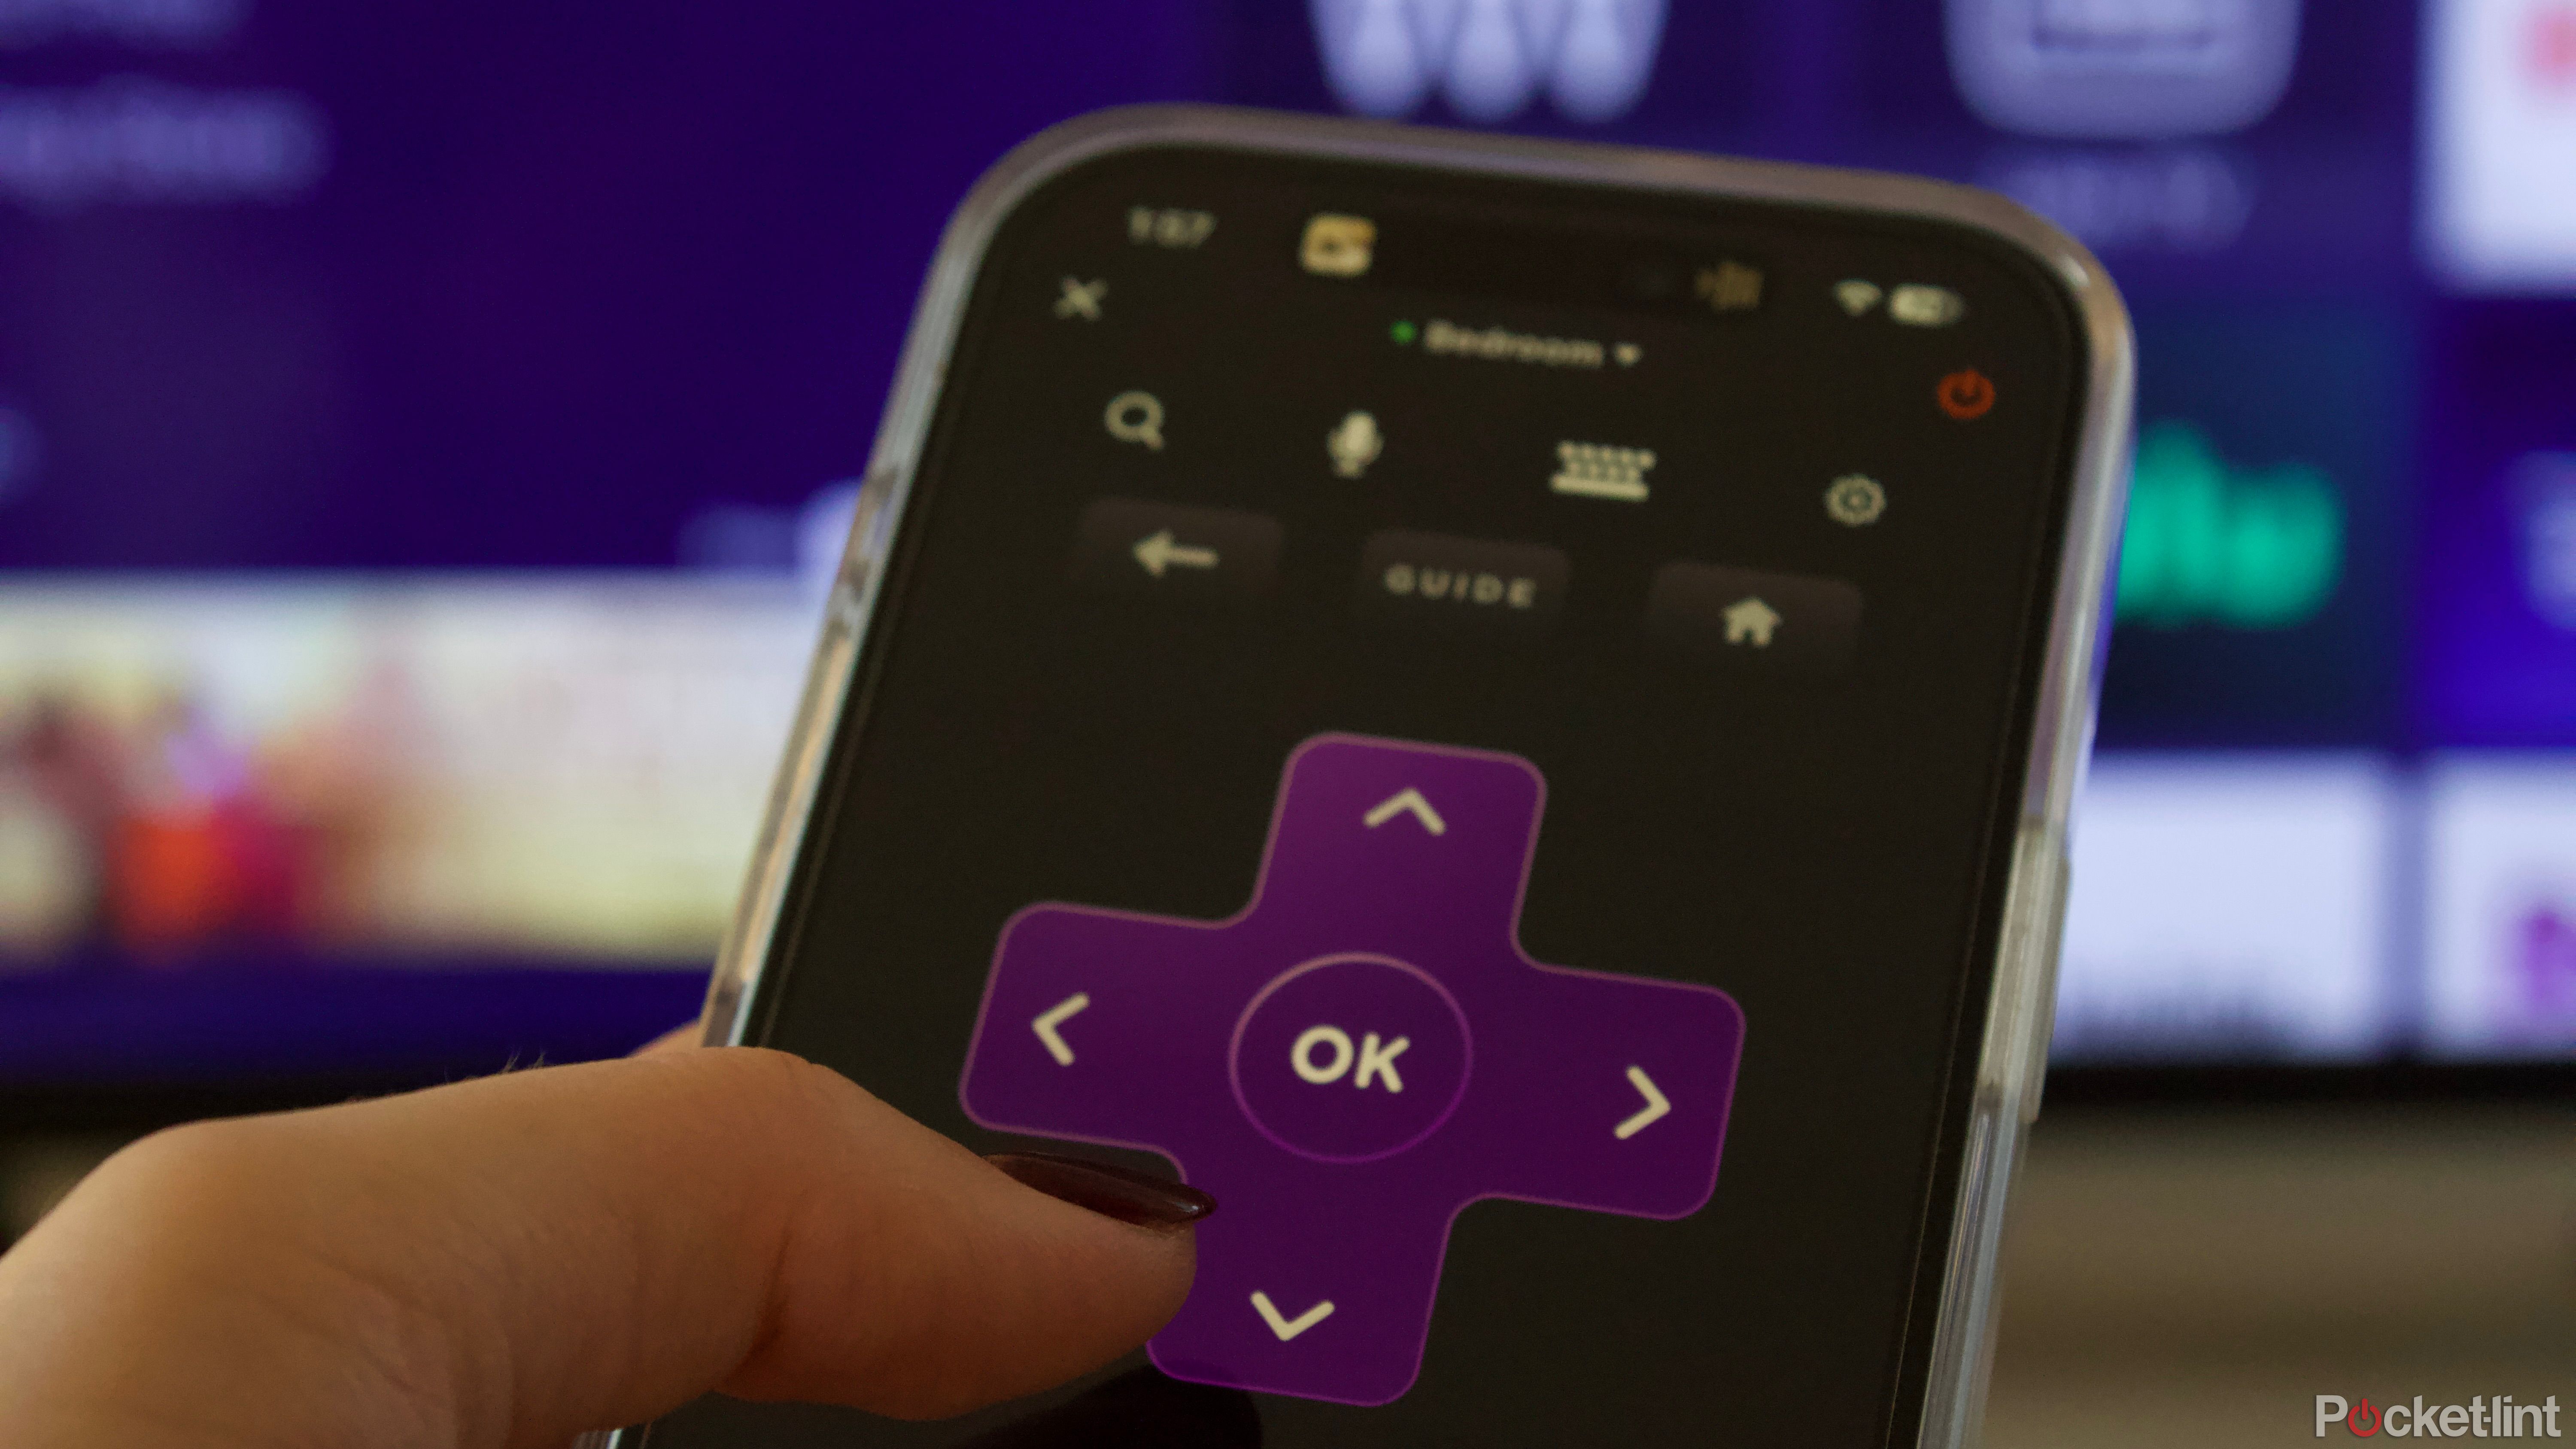 Roku TV remote controller on iPhone